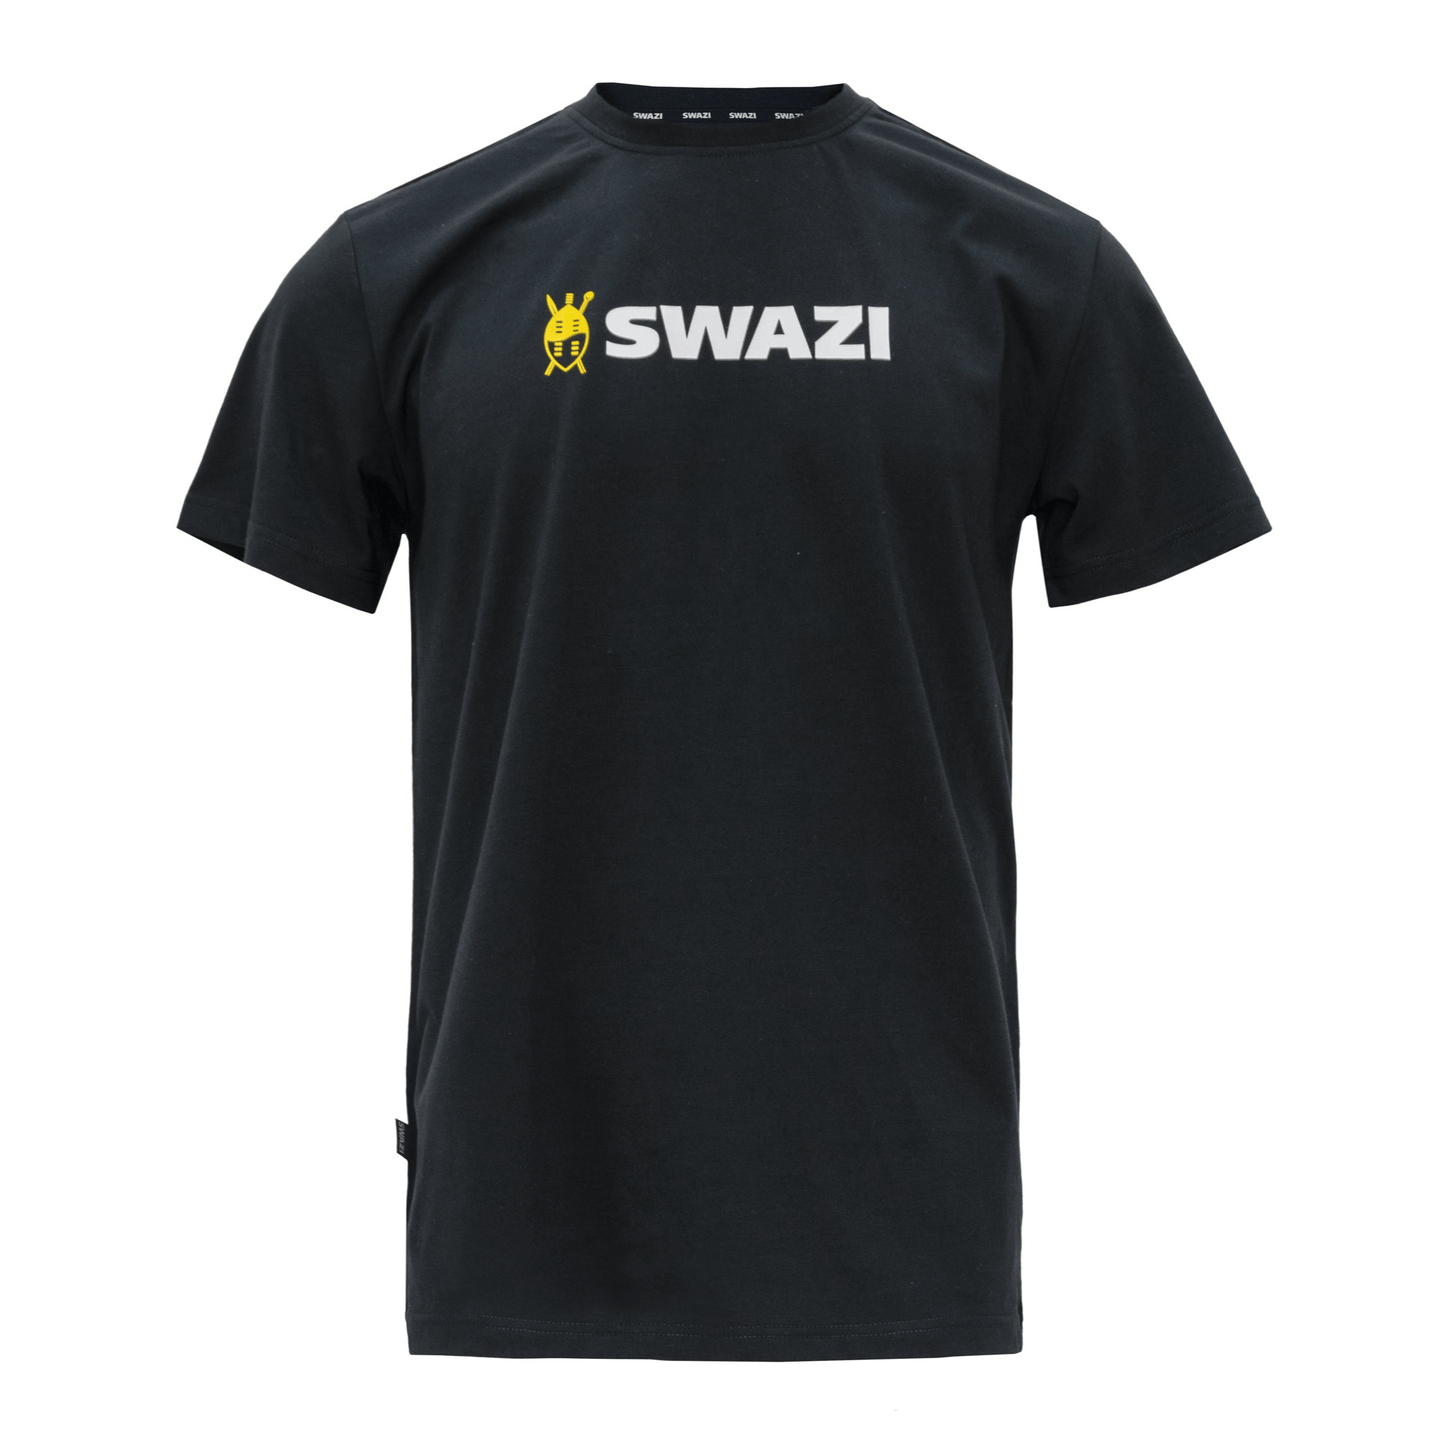 Product photo of the Swazi T-Shirt in Black